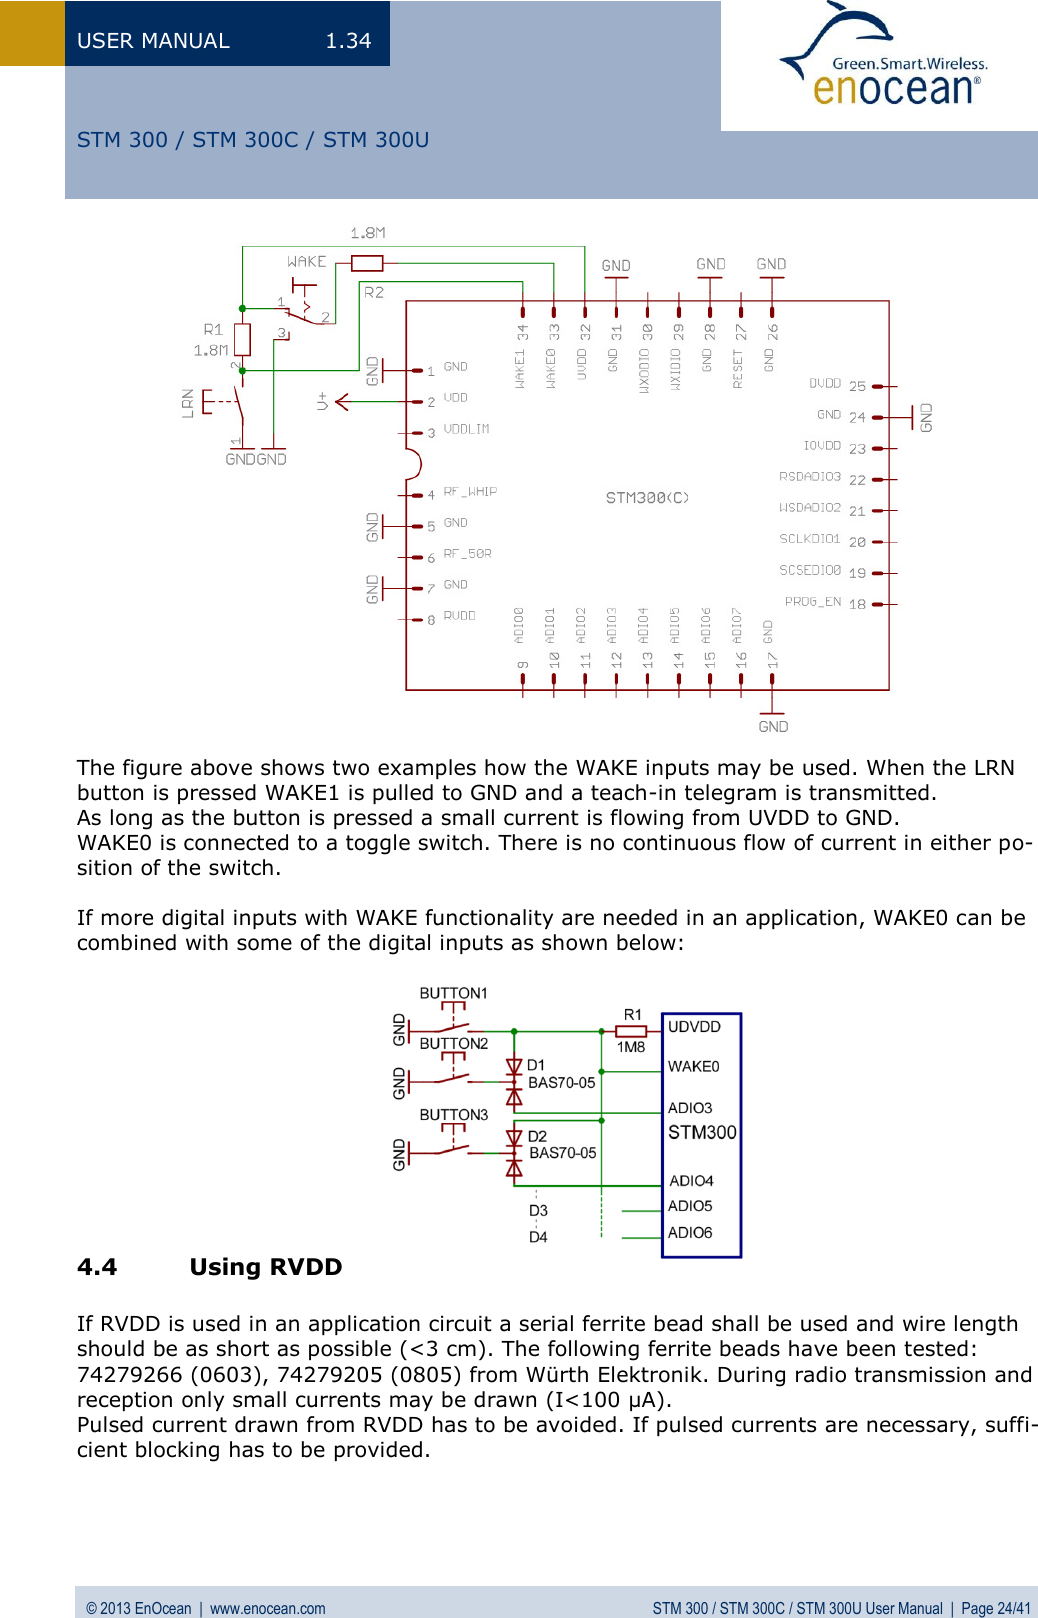 USER MANUAL  1.34 © 2013 EnOcean  |  www.enocean.com  STM 300 / STM 300C / STM 300U User Manual  |  Page 24/41   STM 300 / STM 300C / STM 300U                 The figure above shows two examples how the WAKE inputs may be used. When the LRN button is pressed WAKE1 is pulled to GND and a teach-in telegram is transmitted.  As long as the button is pressed a small current is flowing from UVDD to GND.  WAKE0 is connected to a toggle switch. There is no continuous flow of current in either po-sition of the switch.  If more digital inputs with WAKE functionality are needed in an application, WAKE0 can be combined with some of the digital inputs as shown below:            4.4 Using RVDD  If RVDD is used in an application circuit a serial ferrite bead shall be used and wire length should be as short as possible (&lt;3 cm). The following ferrite beads have been tested: 74279266 (0603), 74279205 (0805) from Würth Elektronik. During radio transmission and reception only small currents may be drawn (I&lt;100 µA).  Pulsed current drawn from RVDD has to be avoided. If pulsed currents are necessary, suffi-cient blocking has to be provided. 